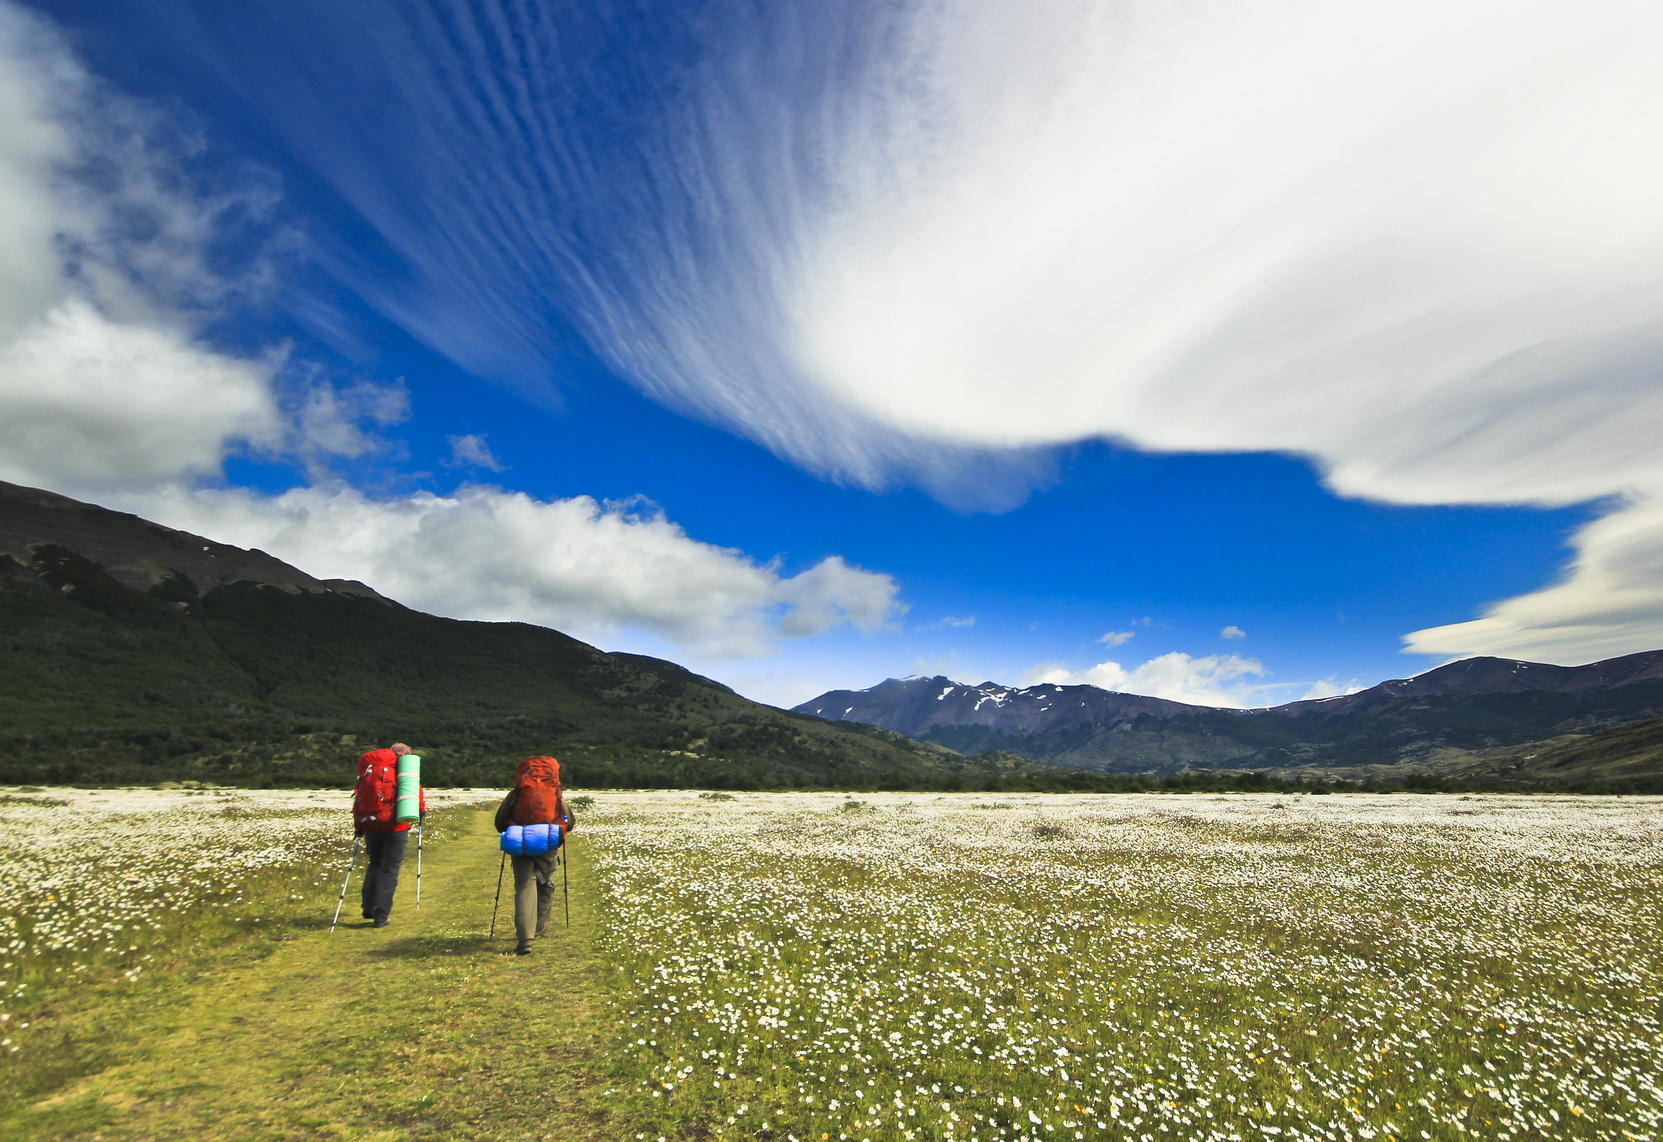 hikers going in patagonia mountains with beautiful clouds